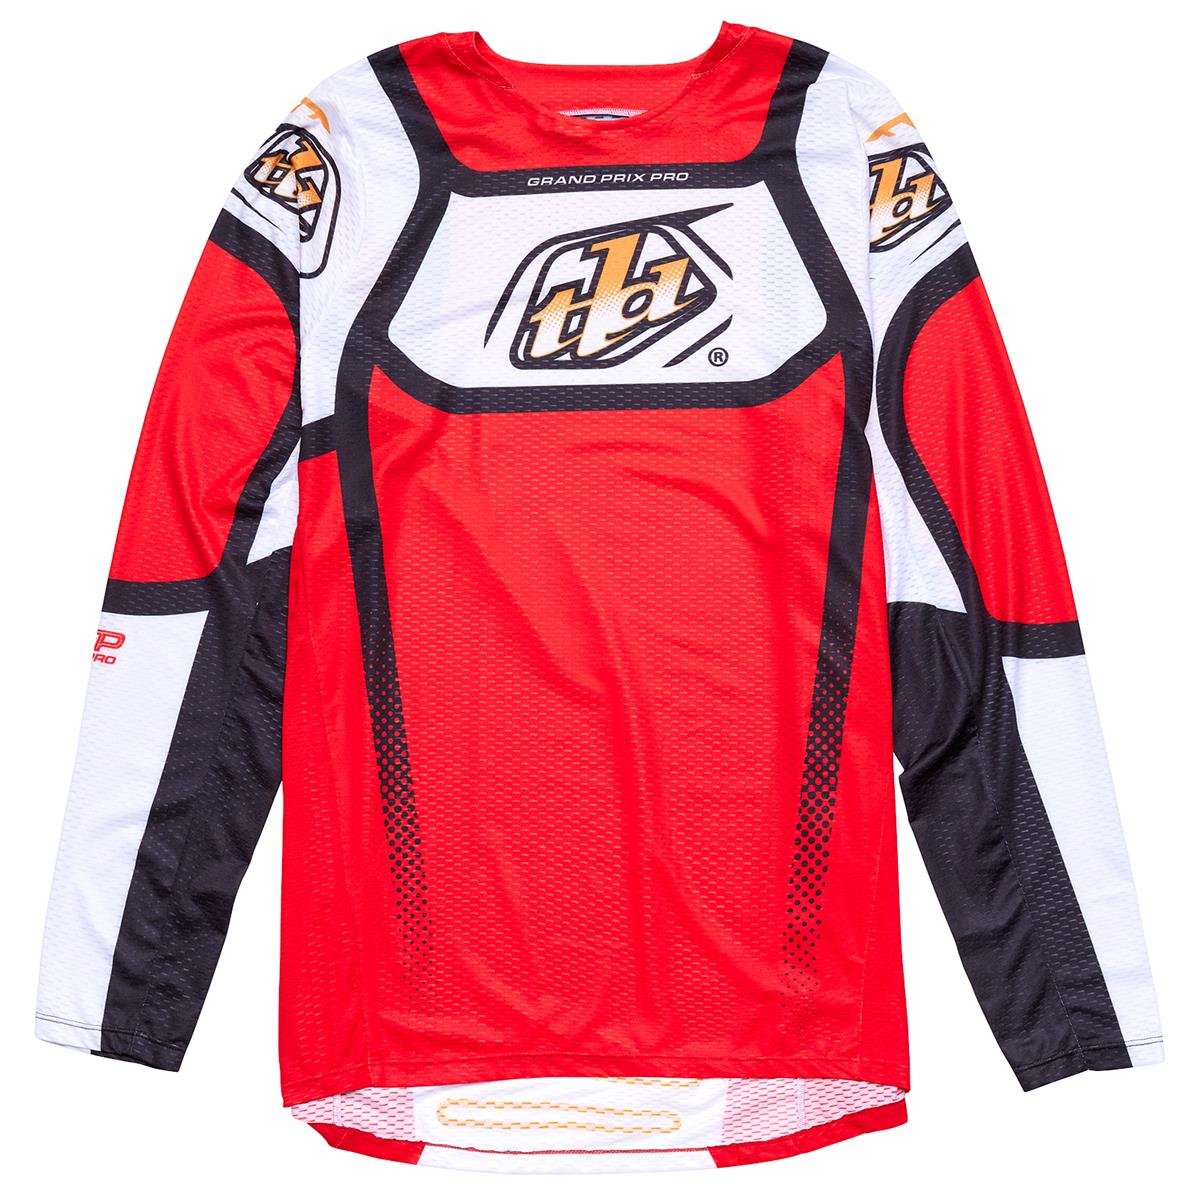 Troy Lee Designs Maglie MX GP Pro Air Bands - Rosso/Bianco